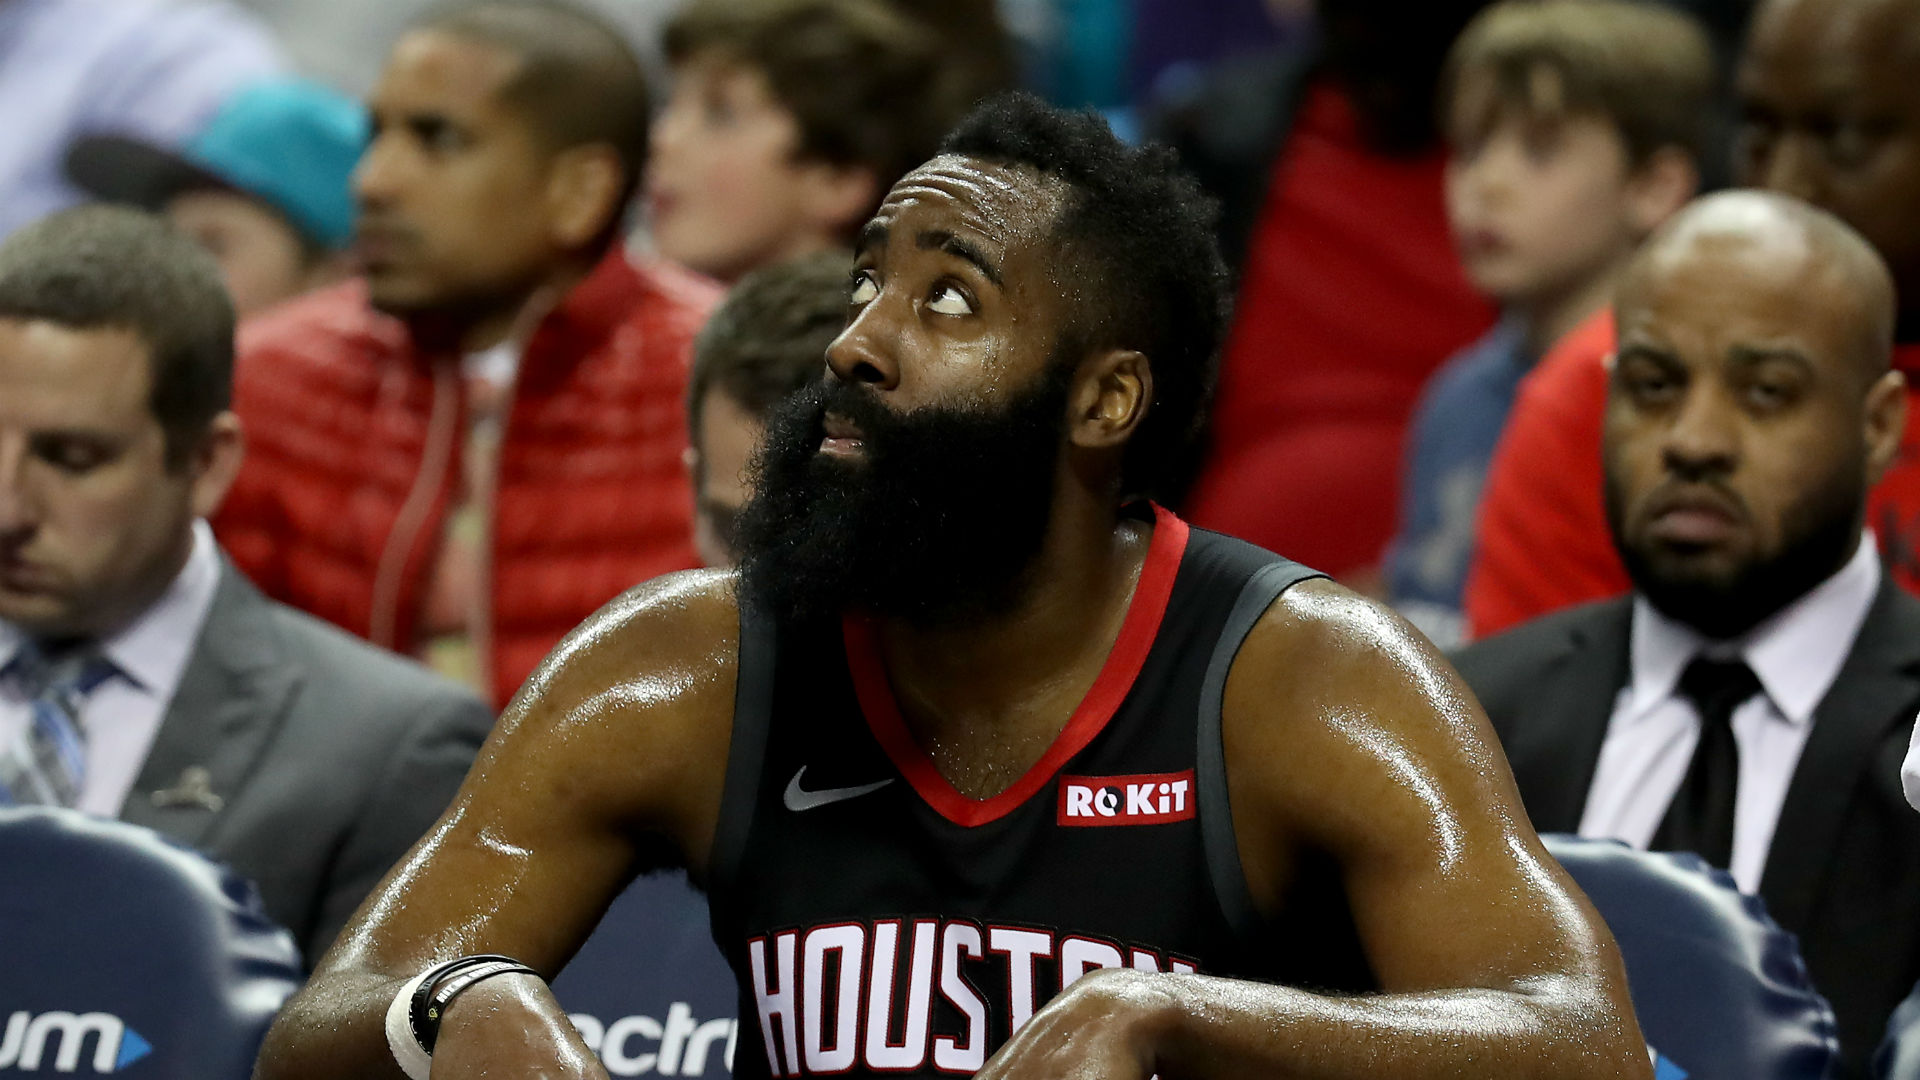 The Houston Rockets were unable to complete a remarkable comeback against the Memphis Grizzlies on a frustrating night for James Harden.